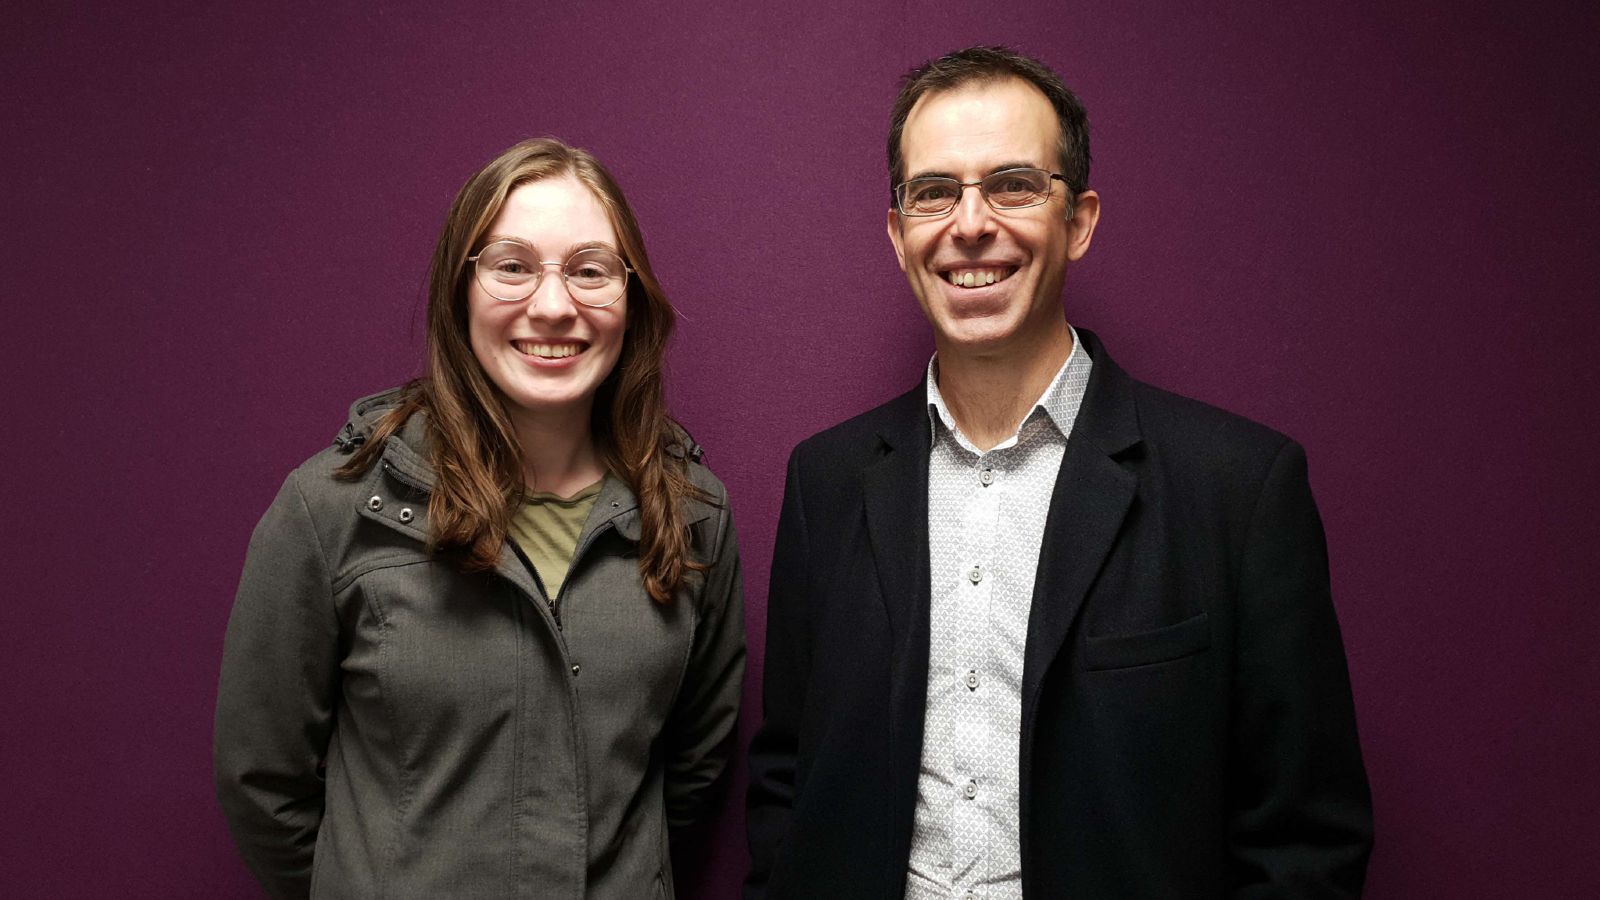 Hayley Mapley and Simon Ferrari stand behind a purple wall smiling to the camera.